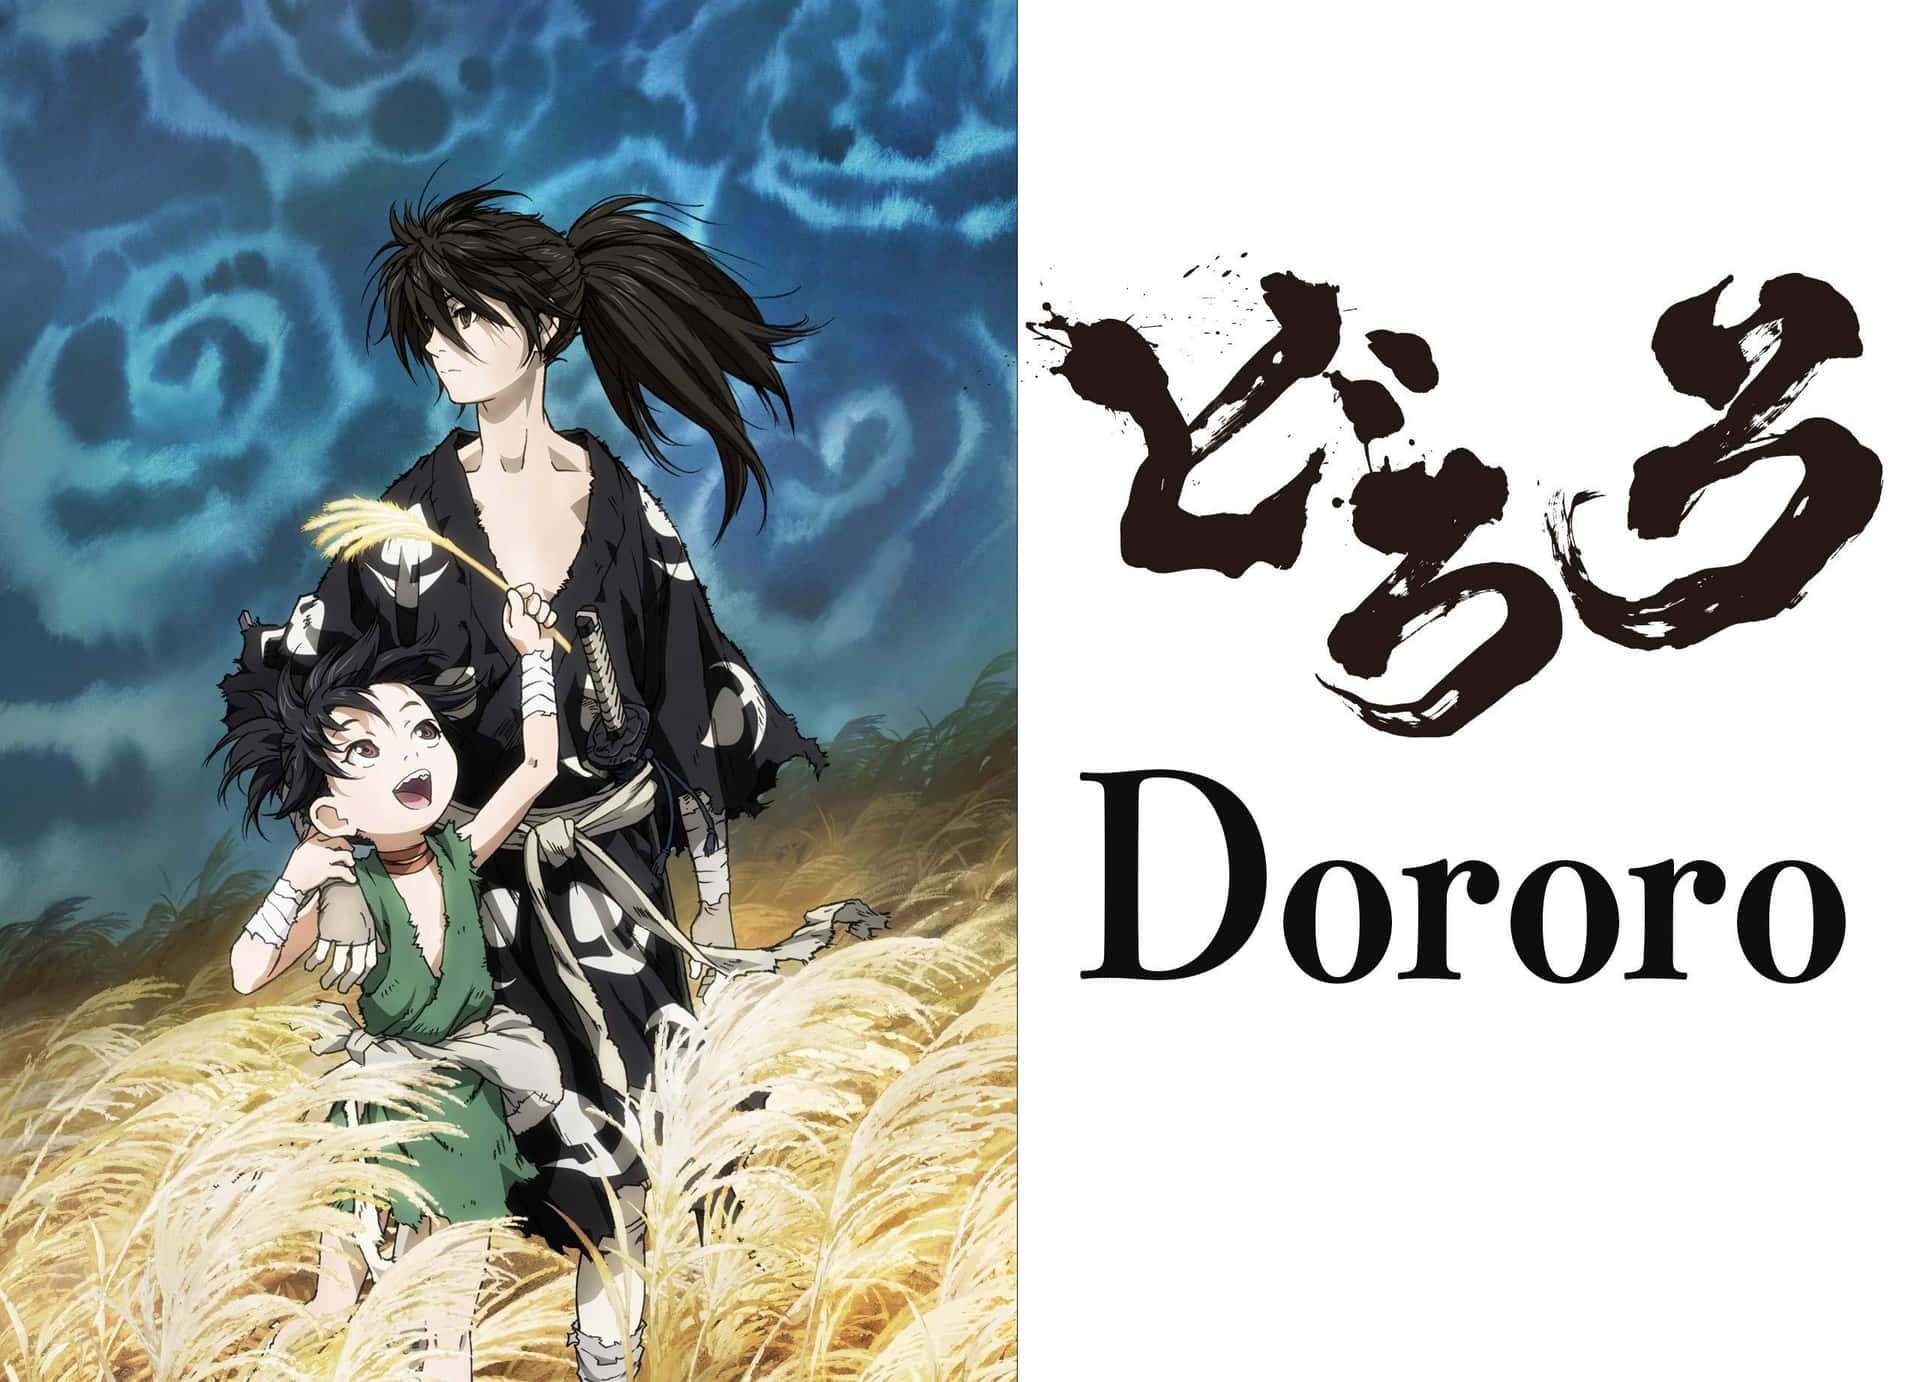 Meet Dororo- A 16-year-old ronin on a quest for justice